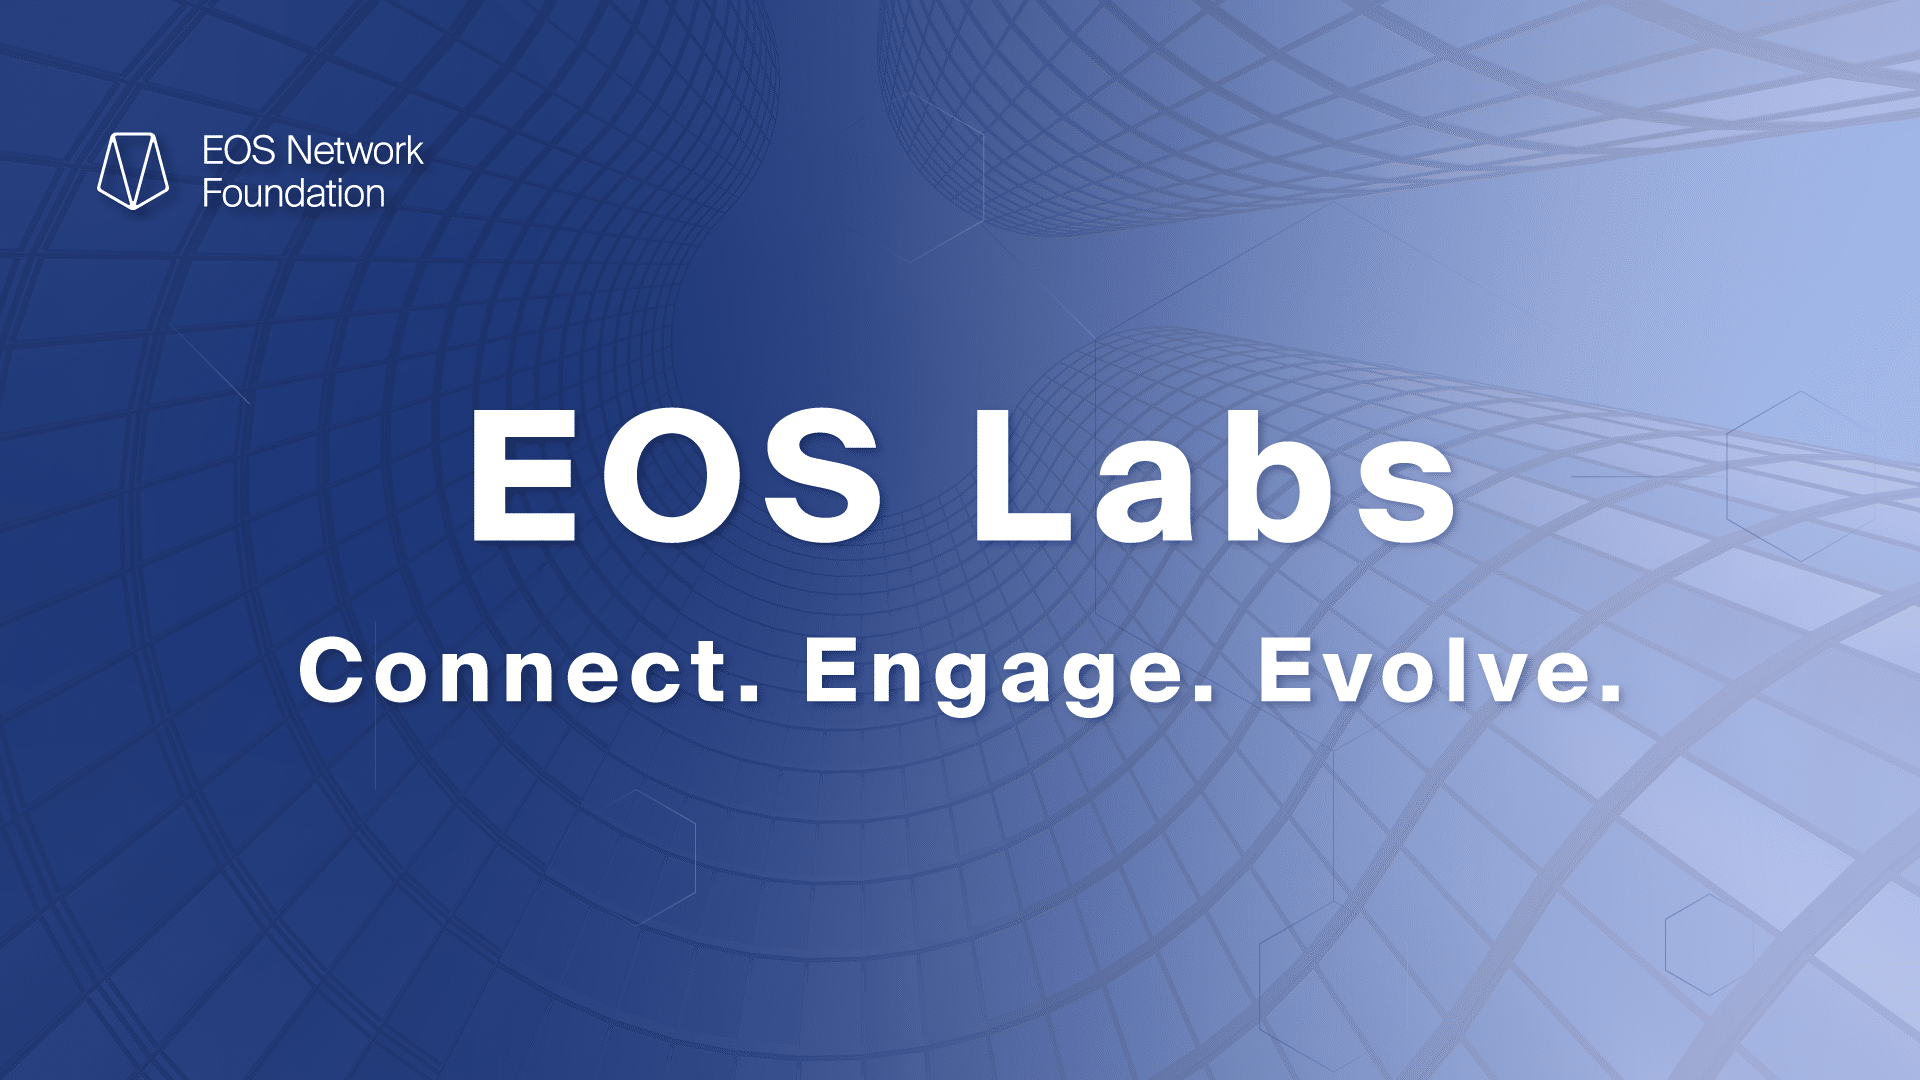 EOS Labs: Connect. Engage. Evolve.